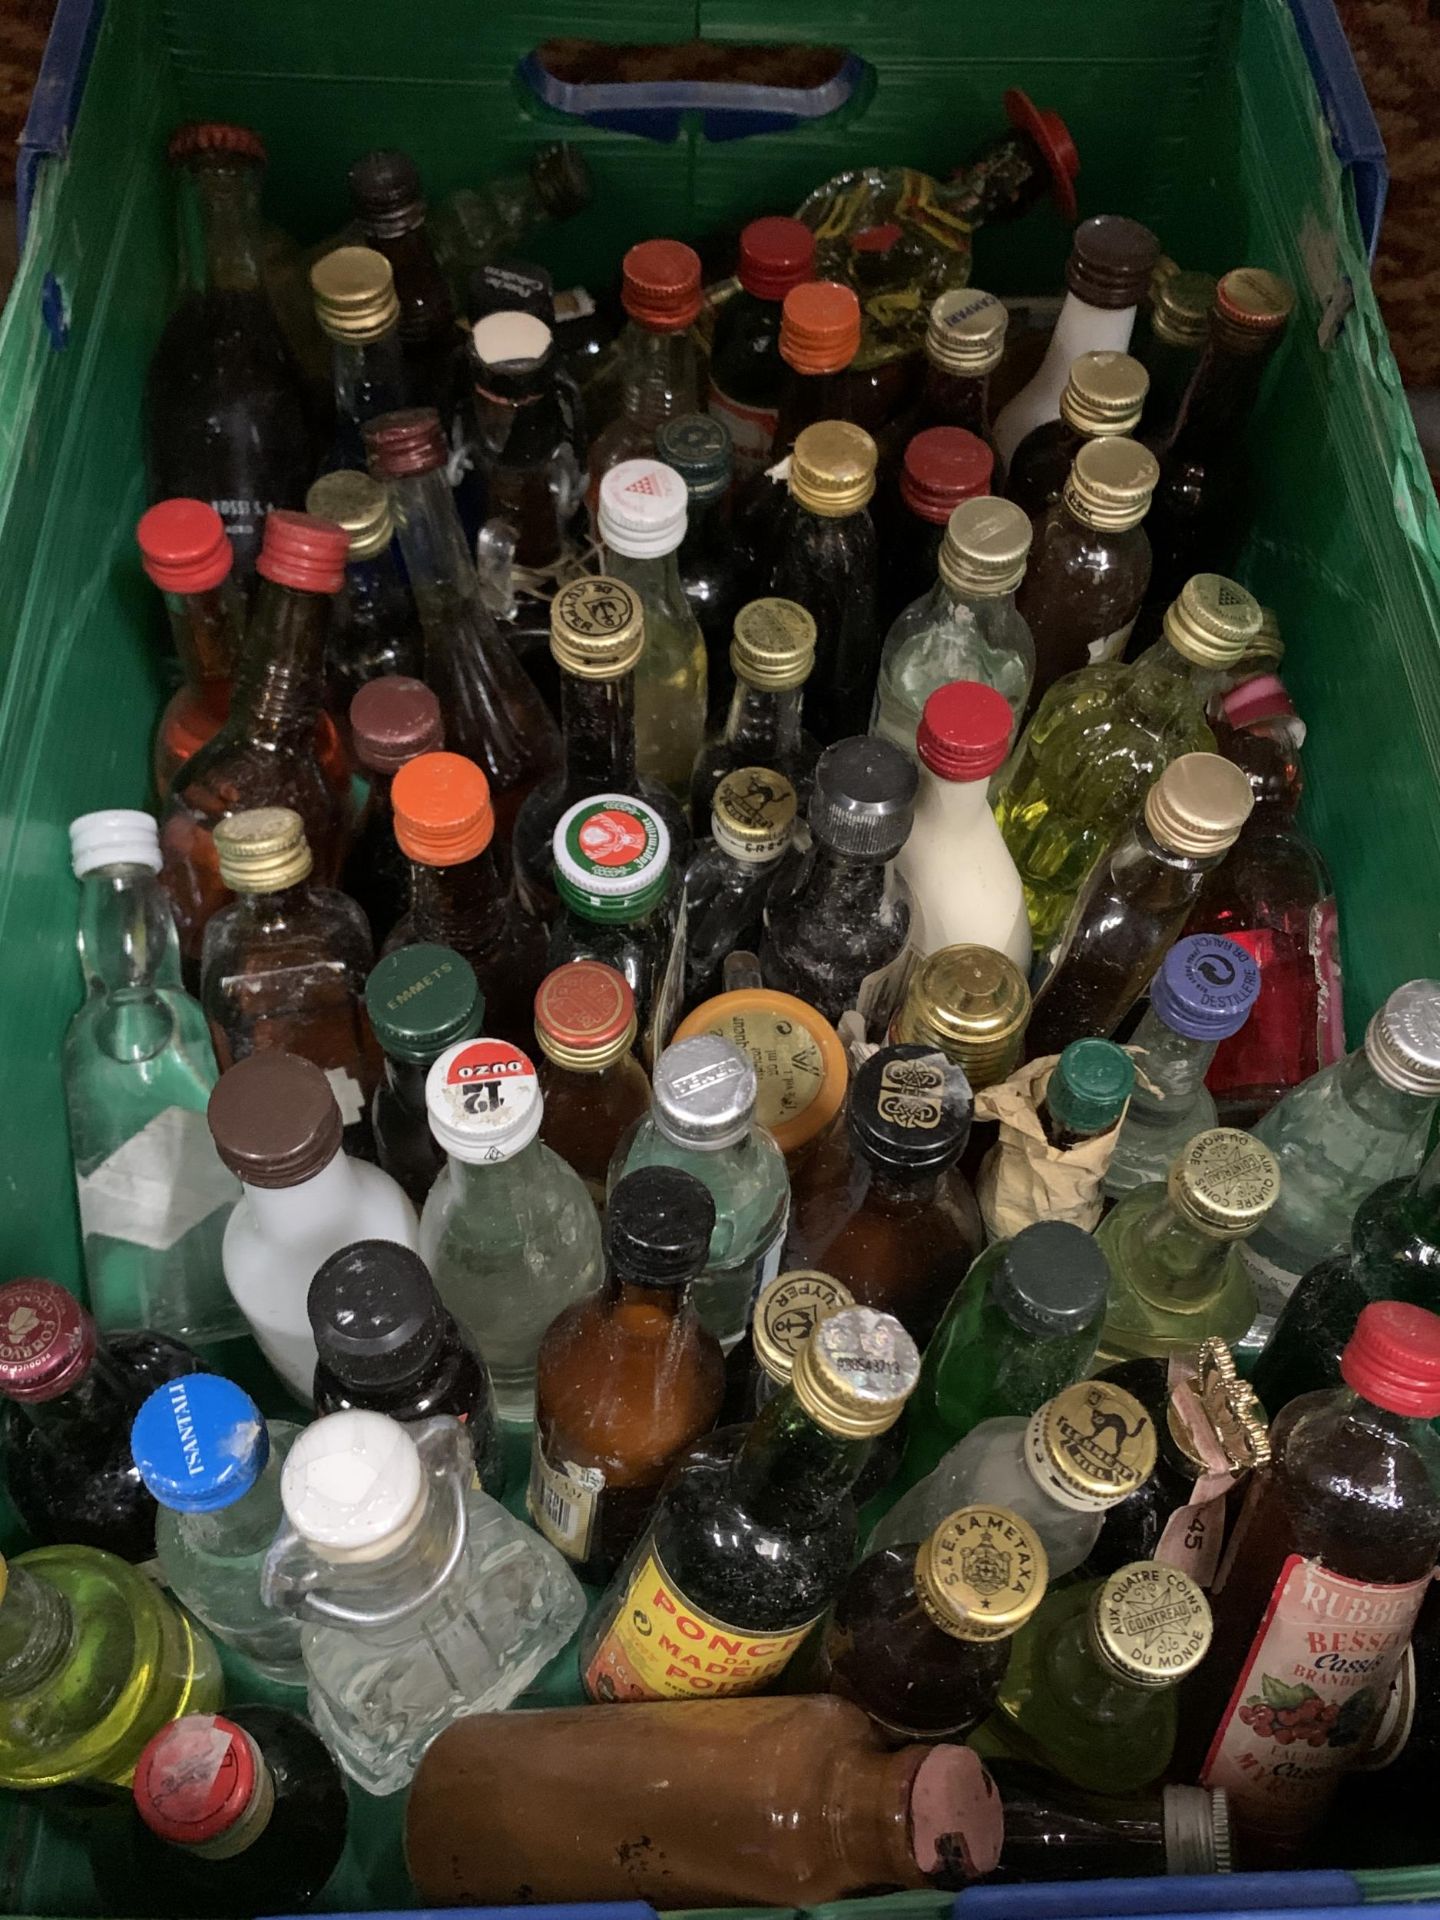 A LARGE QUANTITY OF MINIATURE BOTTLES OF SPIRITS - Image 2 of 5